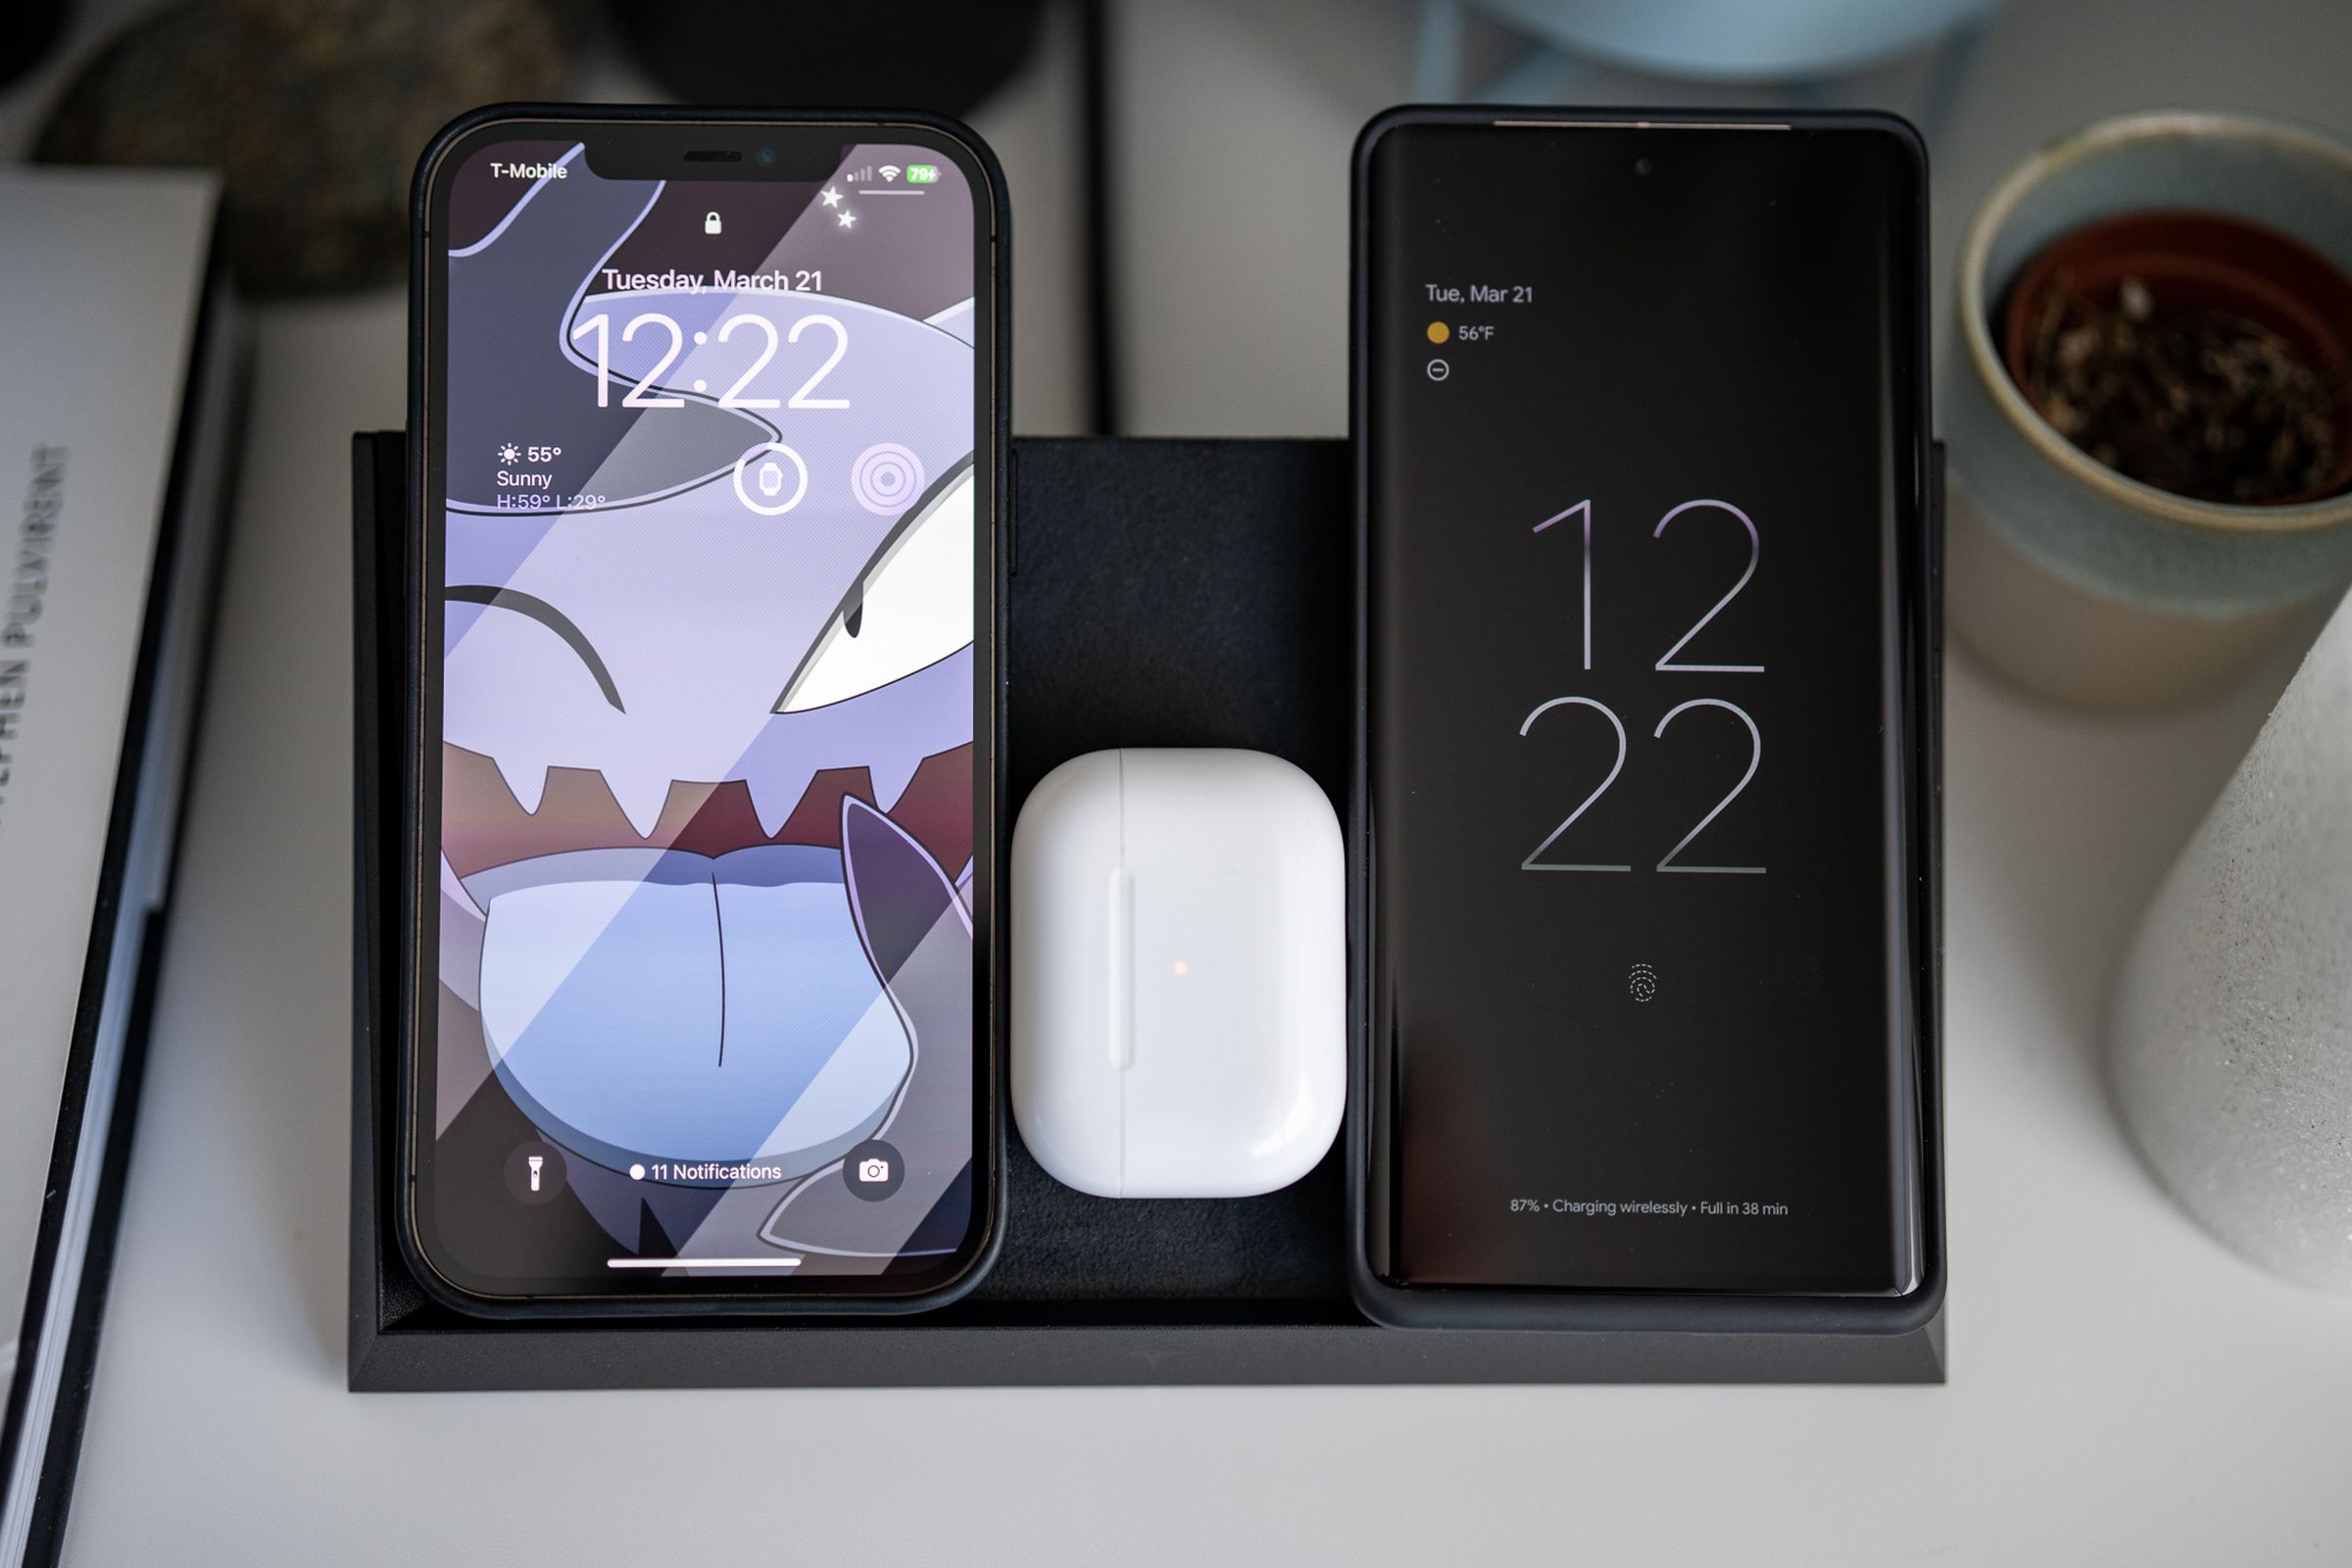 Your three simultaneously charging devices could, in theory, be a trio of phones. But with the size of most phones today, it's likely going to be a pair and some earbuds that juuust fit.